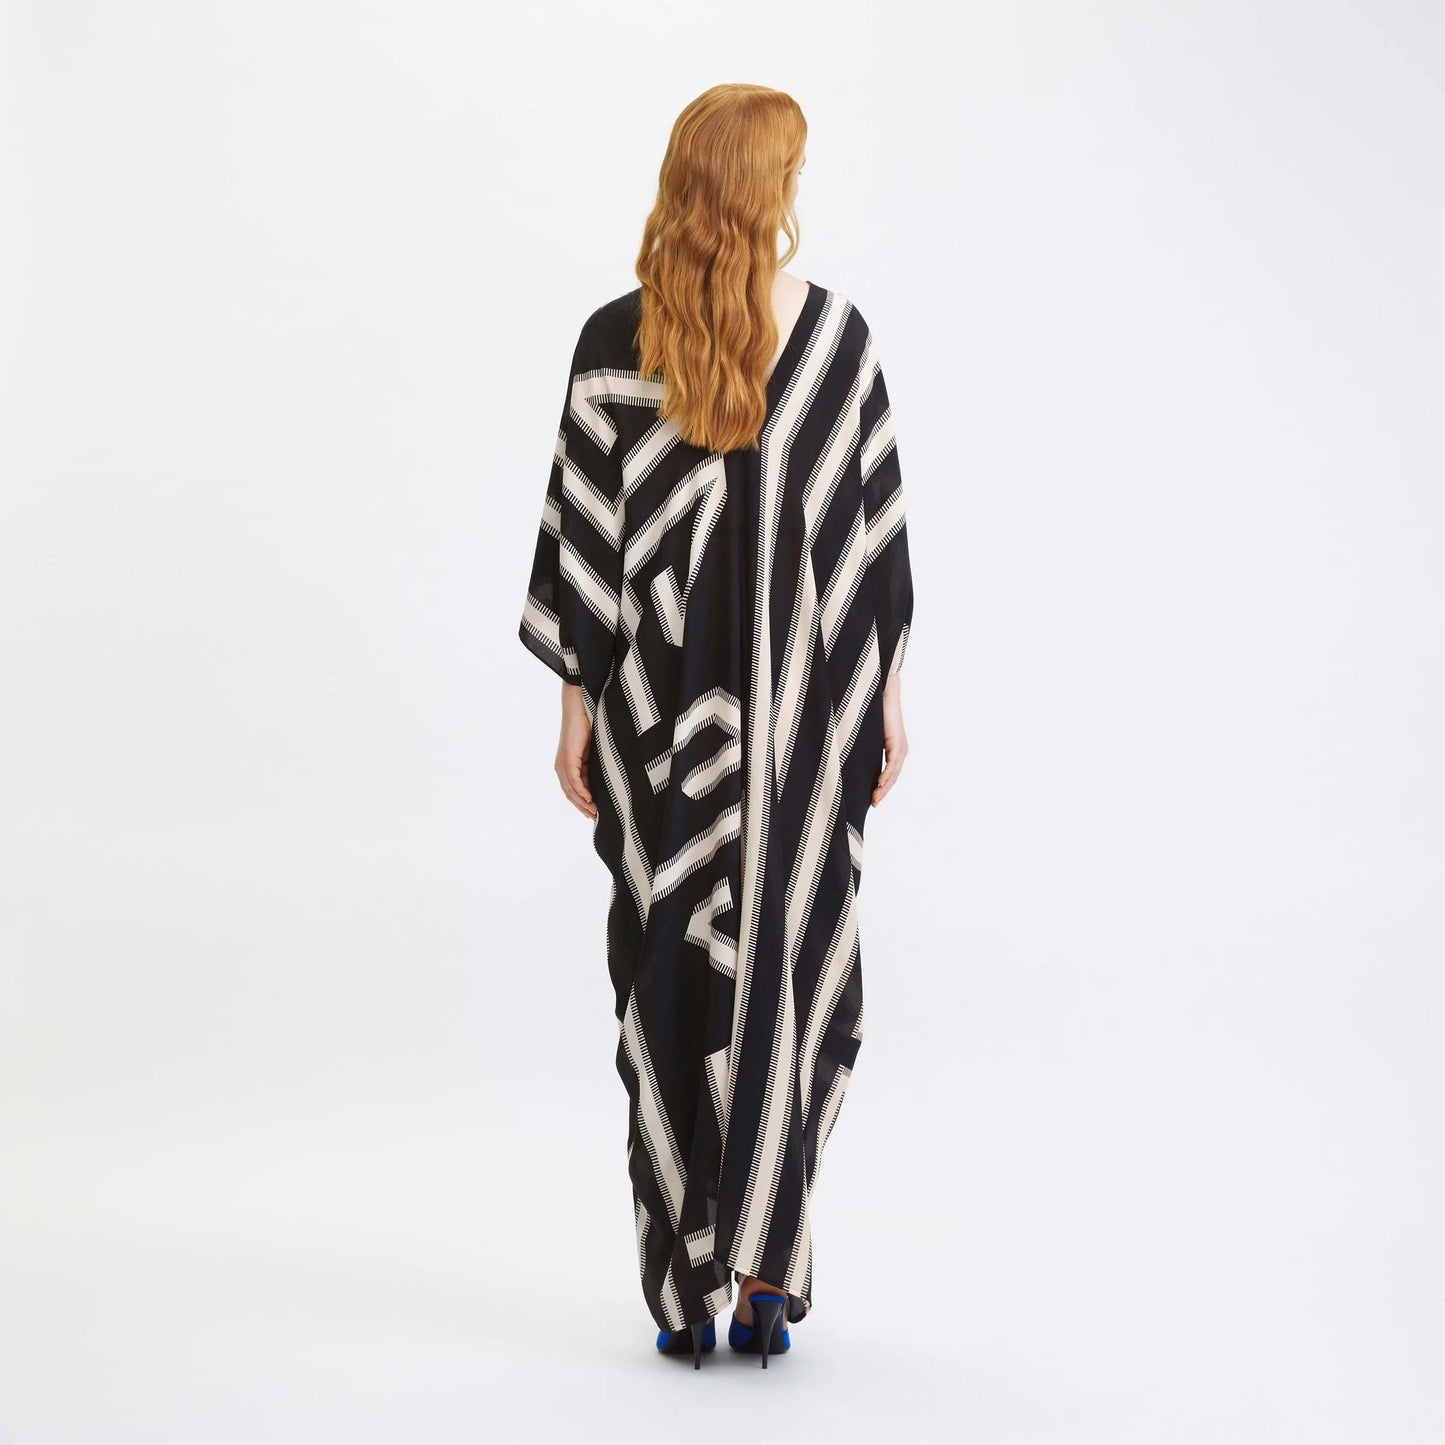 Women wearing a black and cream geometric patterned kaftan with a cinched waist